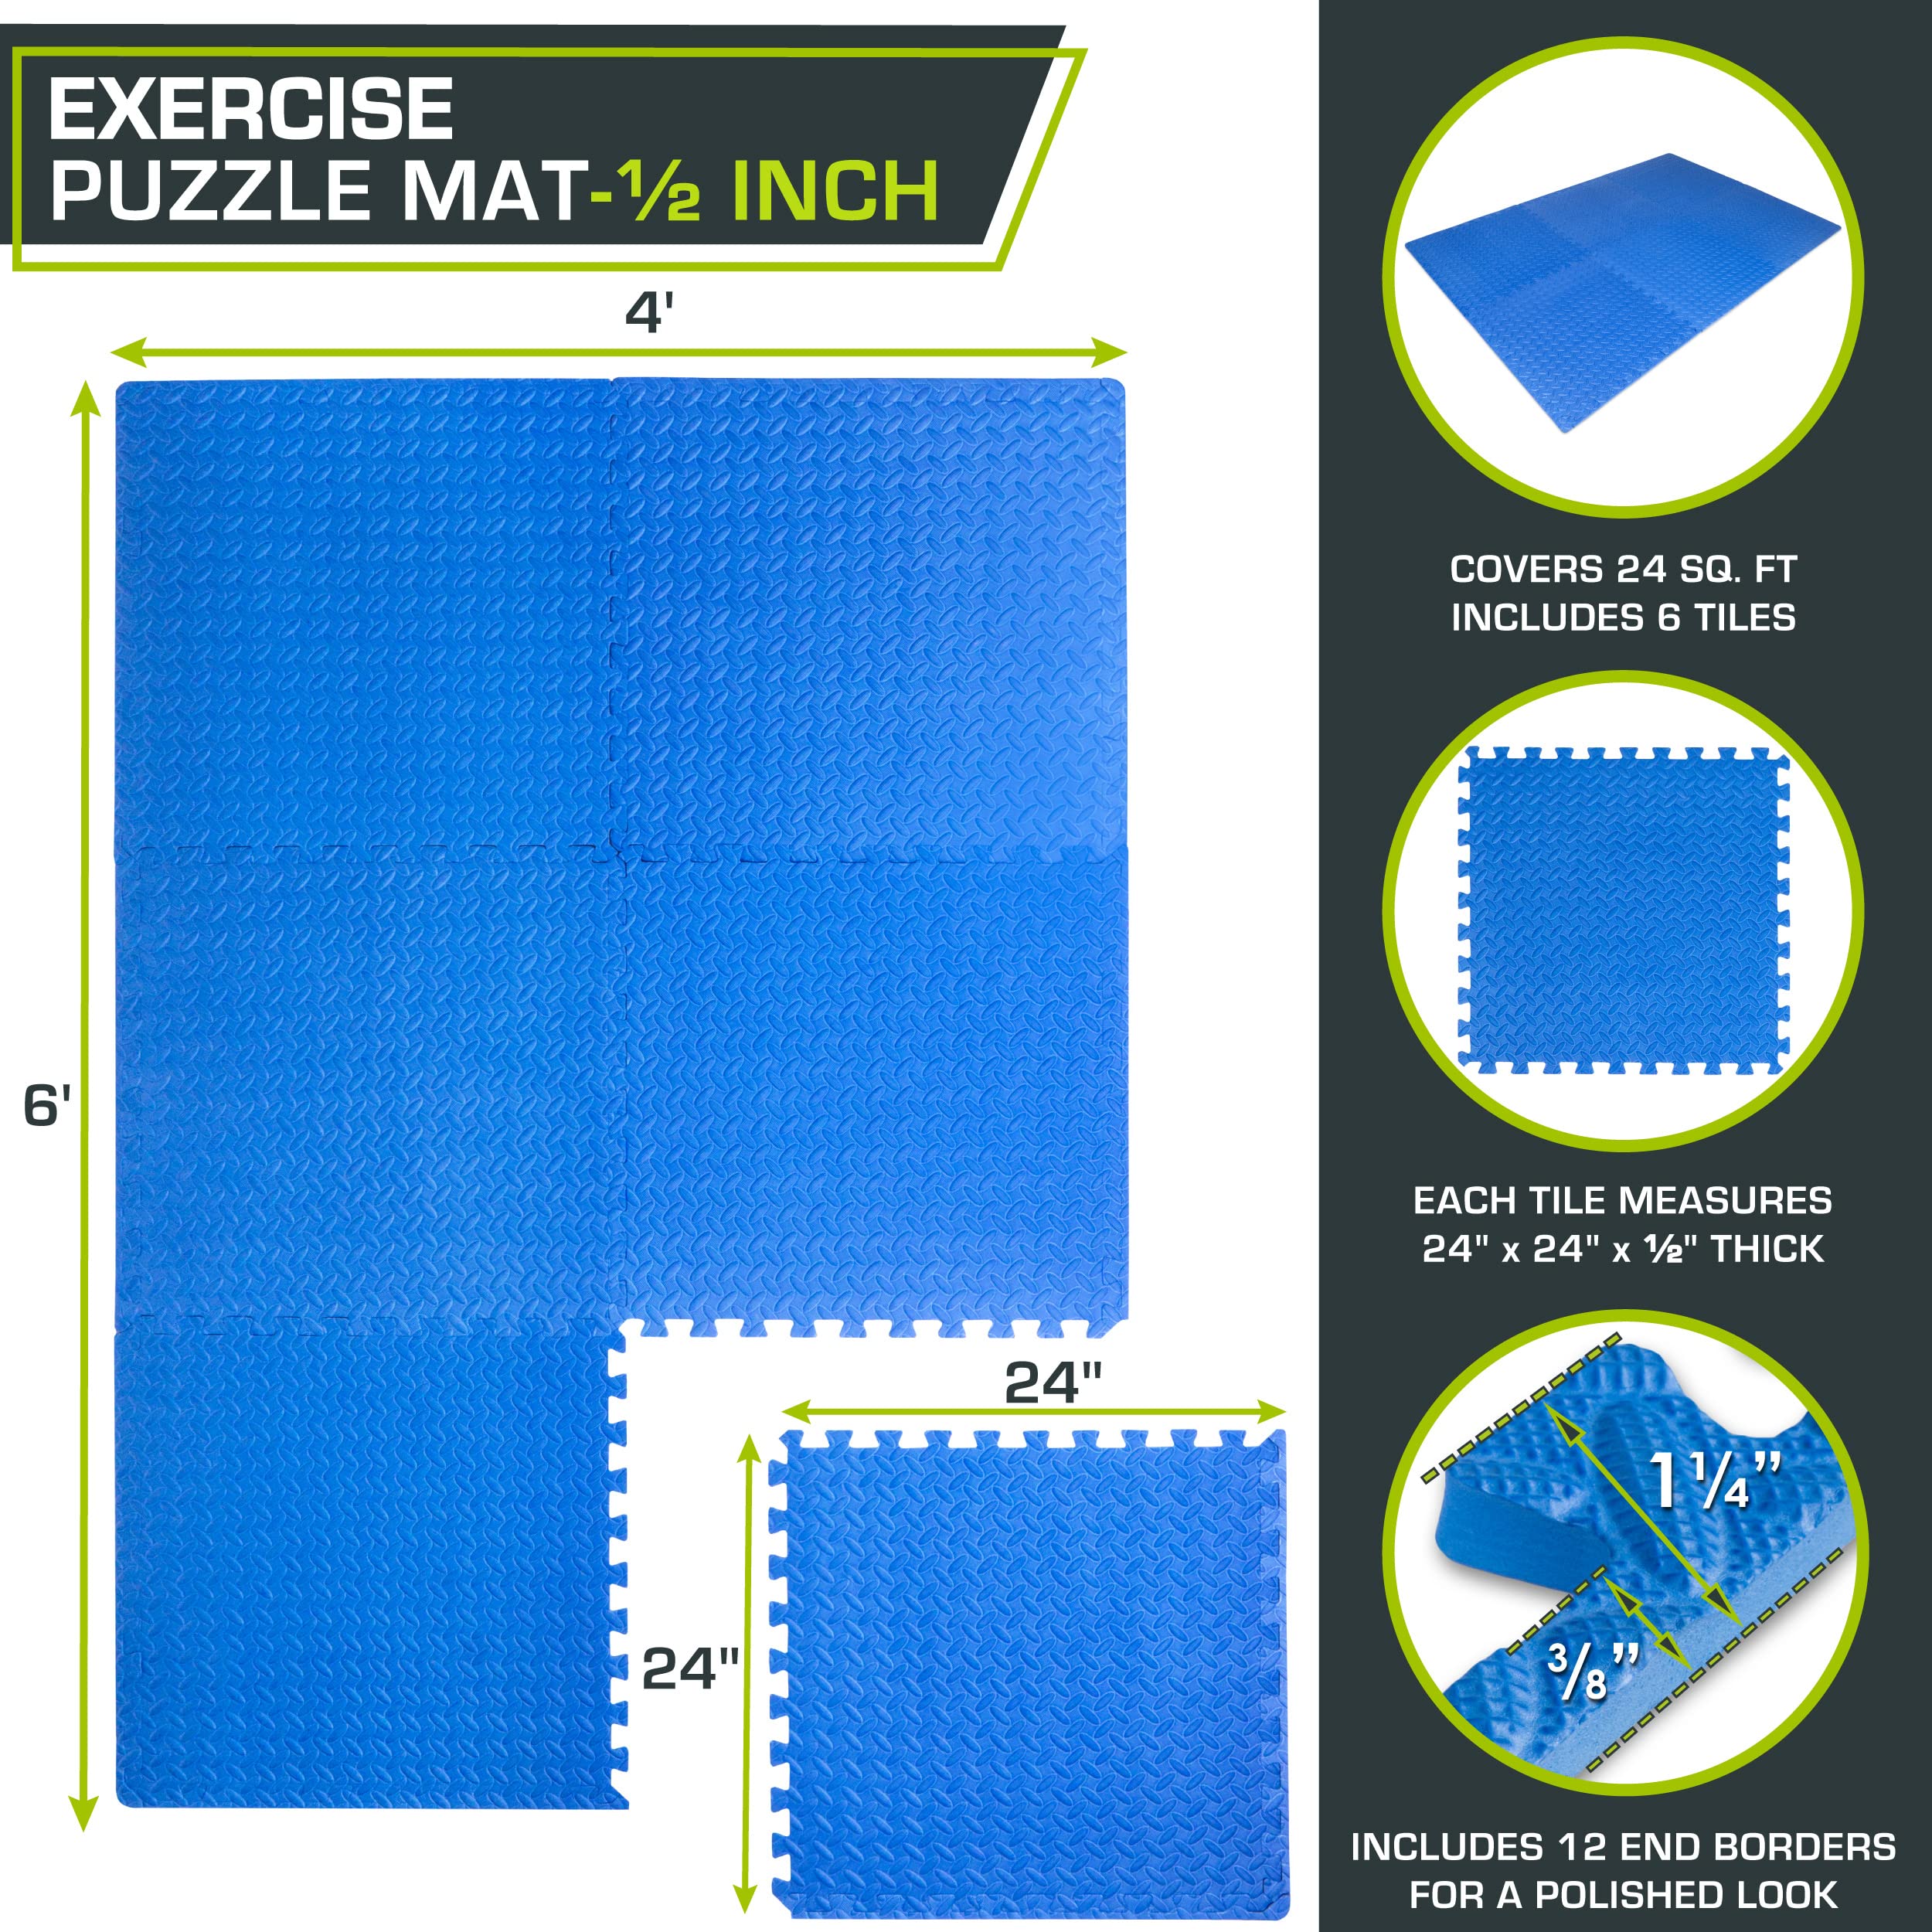 ProsourceFit Puzzle Exercise Mat A in, EVA Interlocking Foam Floor Tiles for Home gym, Mat for Home Workout Equipment, Floor Pad